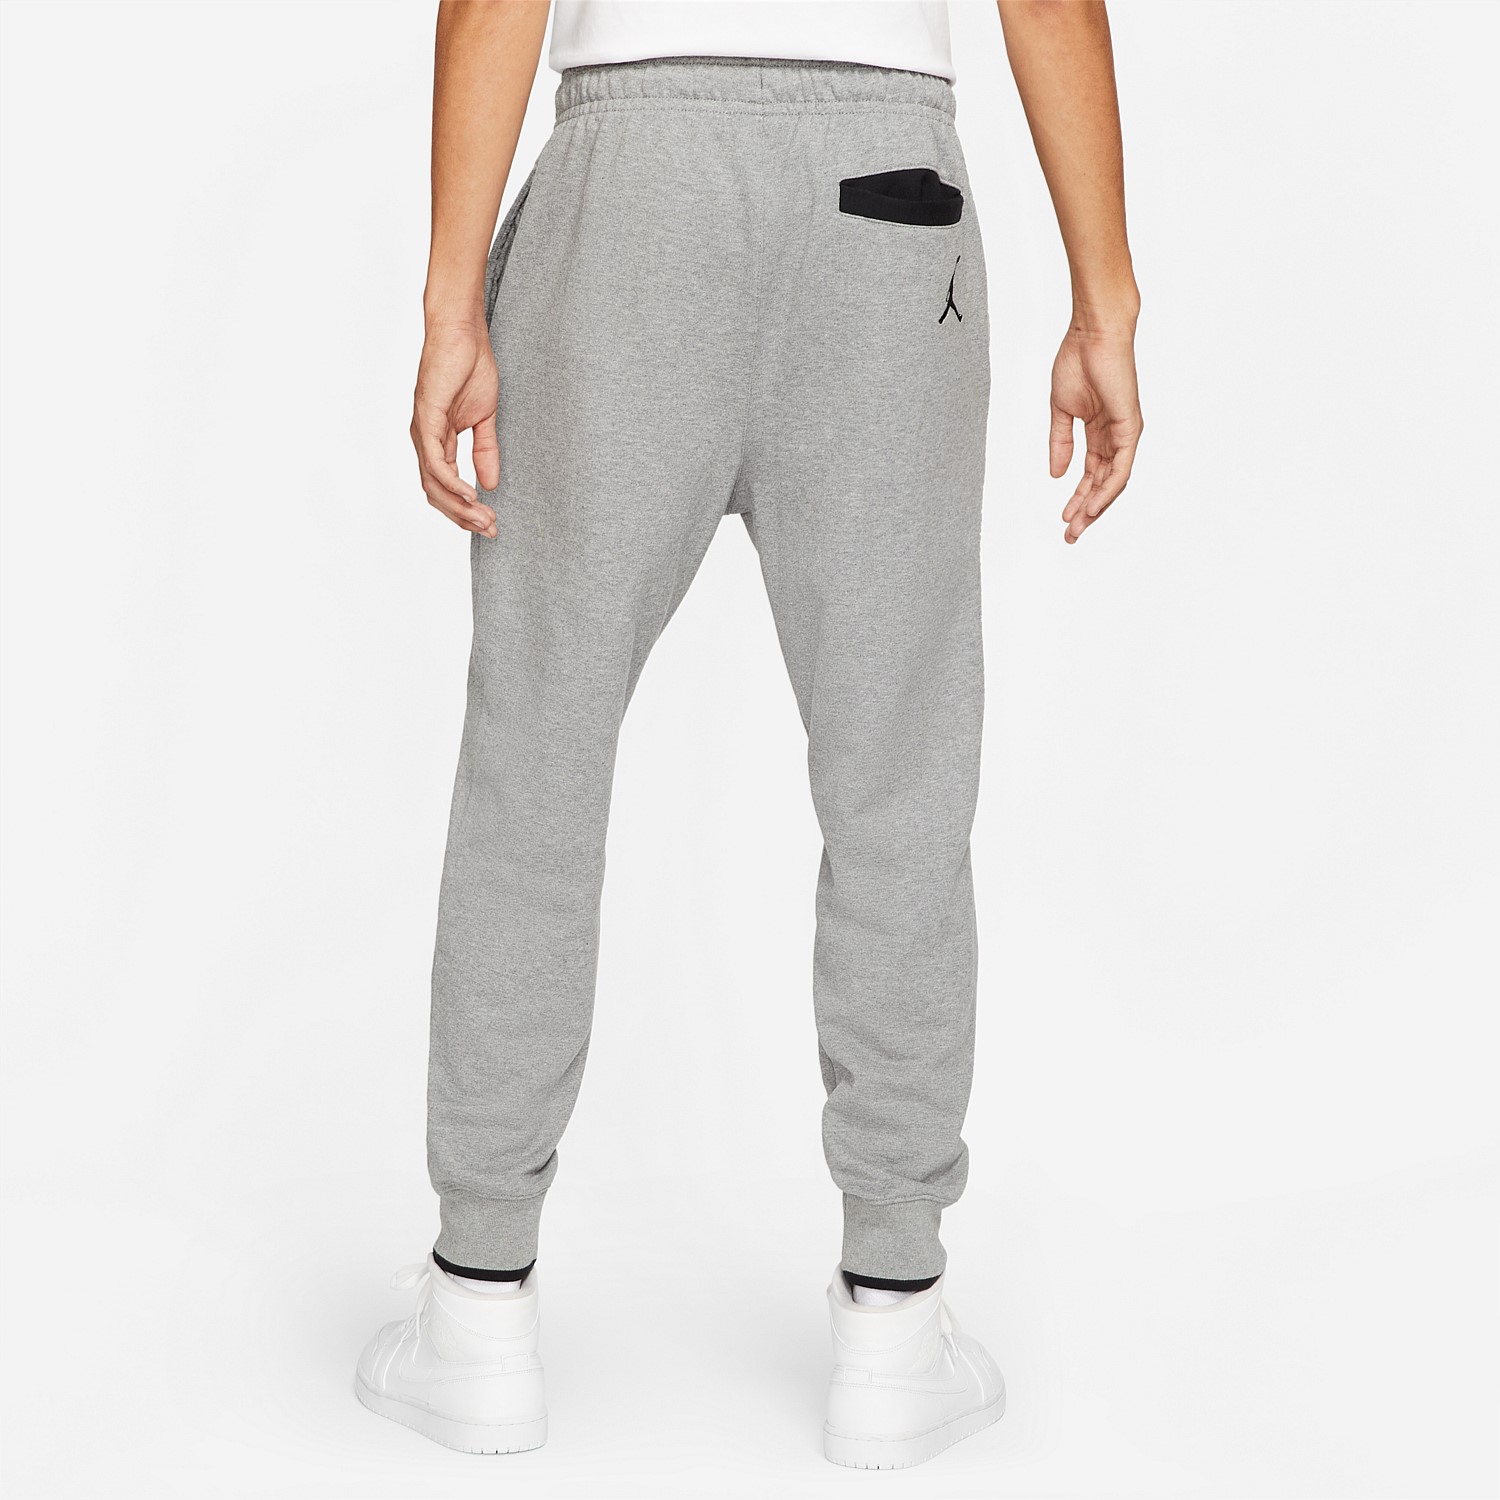 Men's Pants and Sweats | Performance, Comfort and Style | Stirling ...